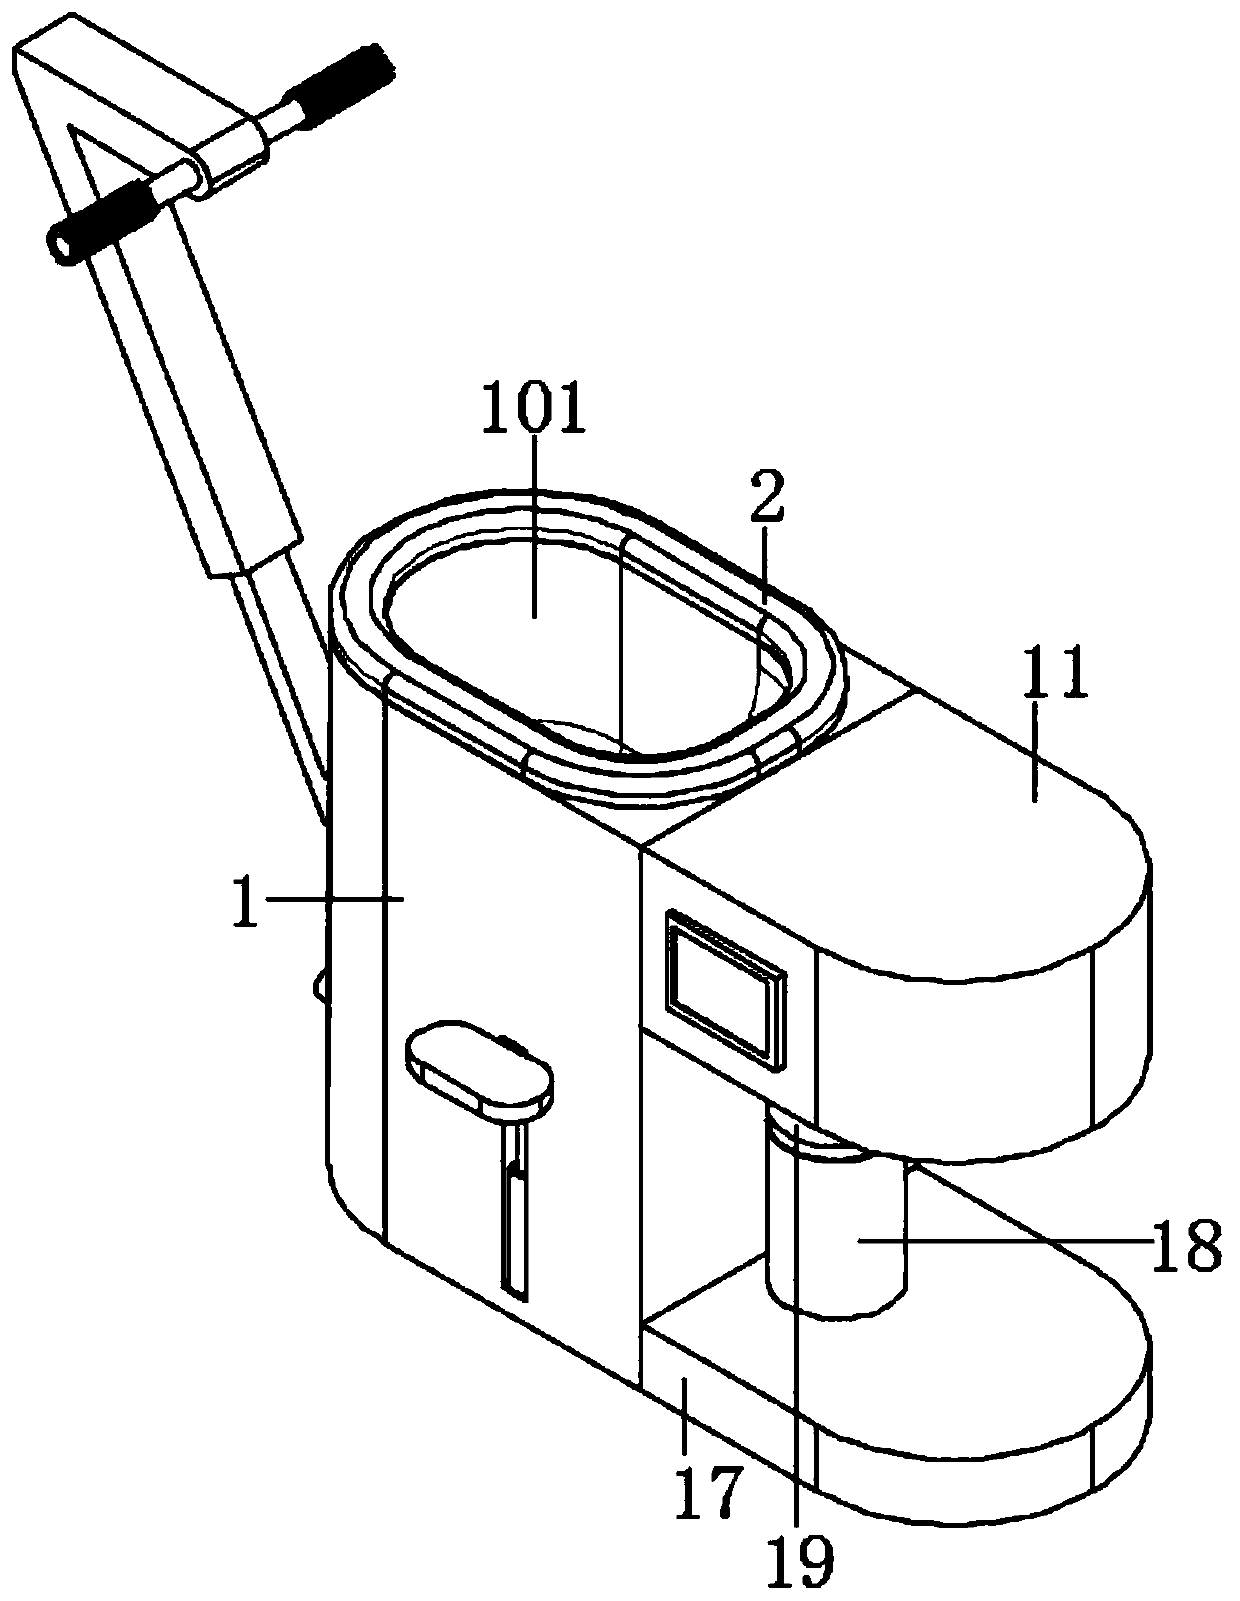 Flushing device for nursing in urinary surgery department